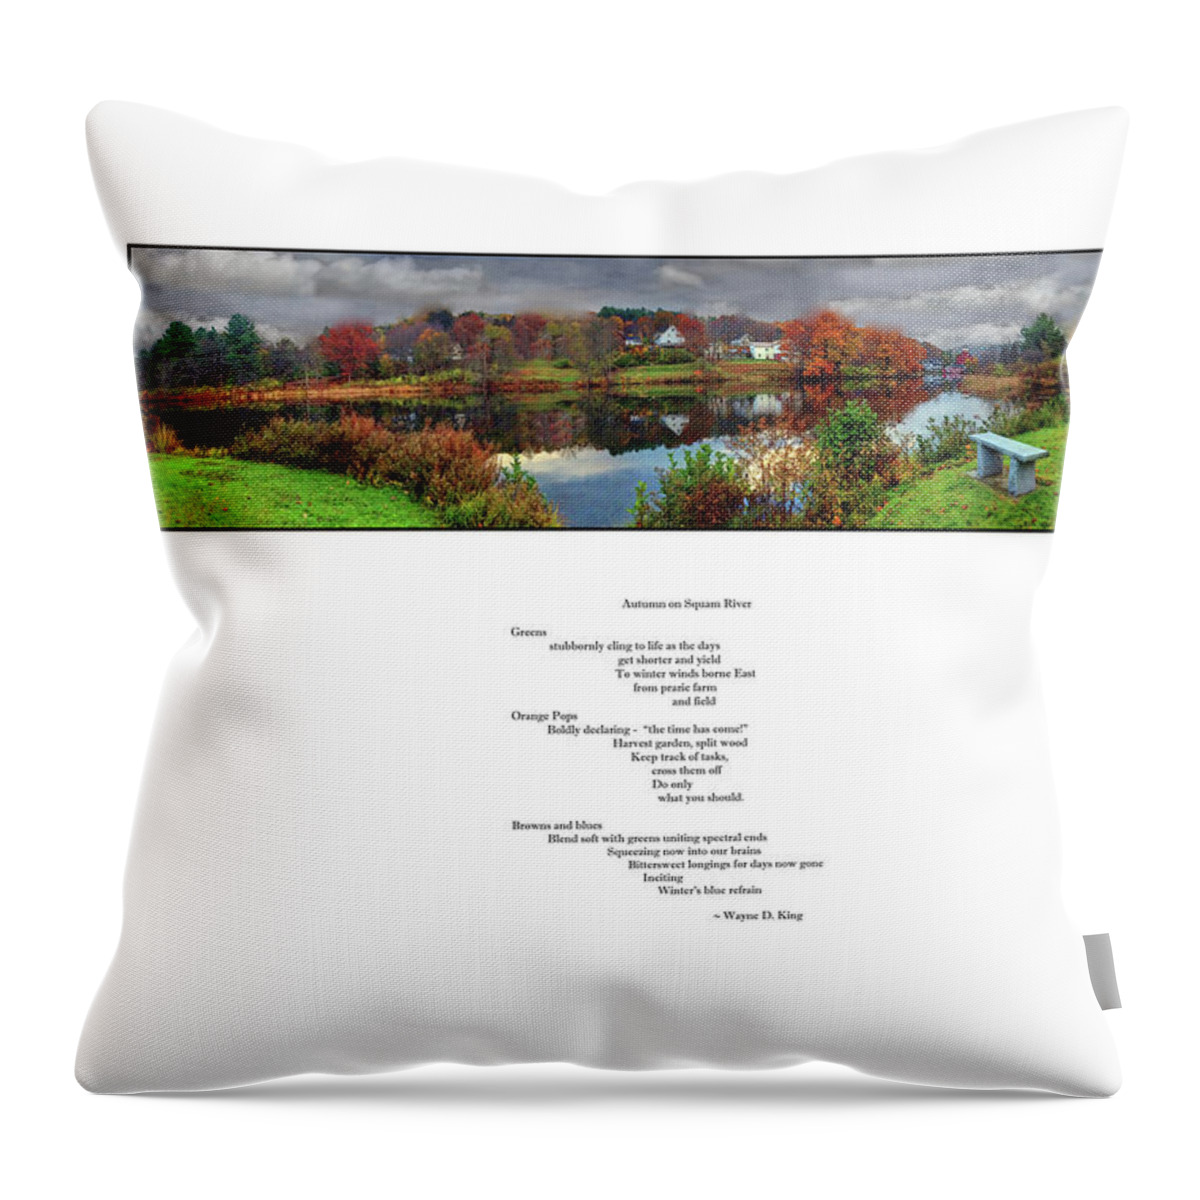 Squam Throw Pillow featuring the photograph Autumn on Squam River Poem by Wayne King